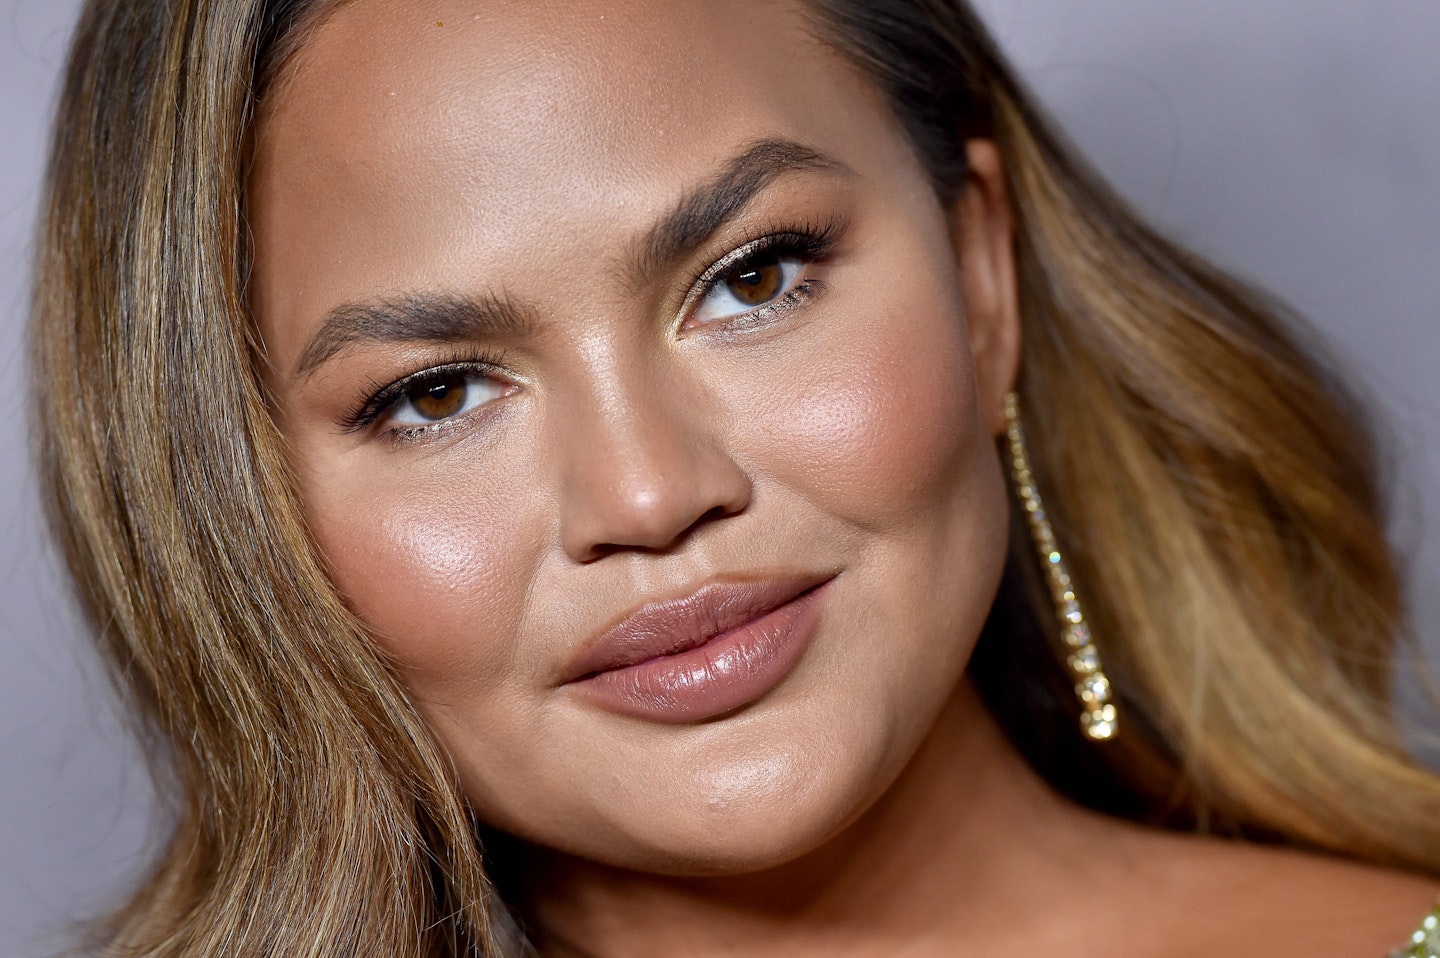 Chrissy Teigen Before and After: Did the Model Get Plastic Surgery?